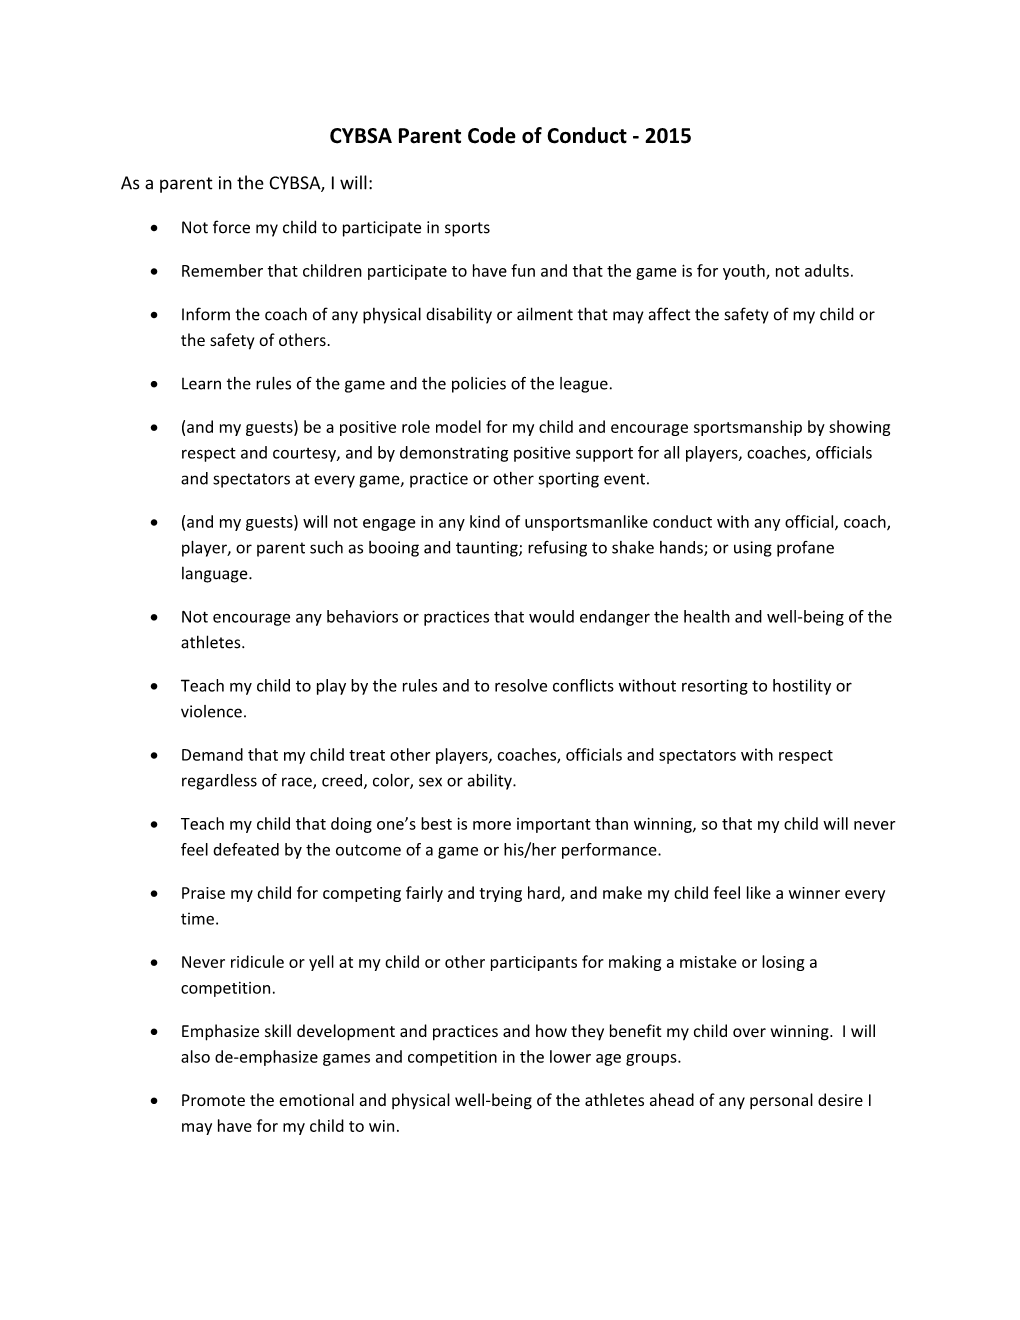 CYBSA Parent Code of Conduct - 2015